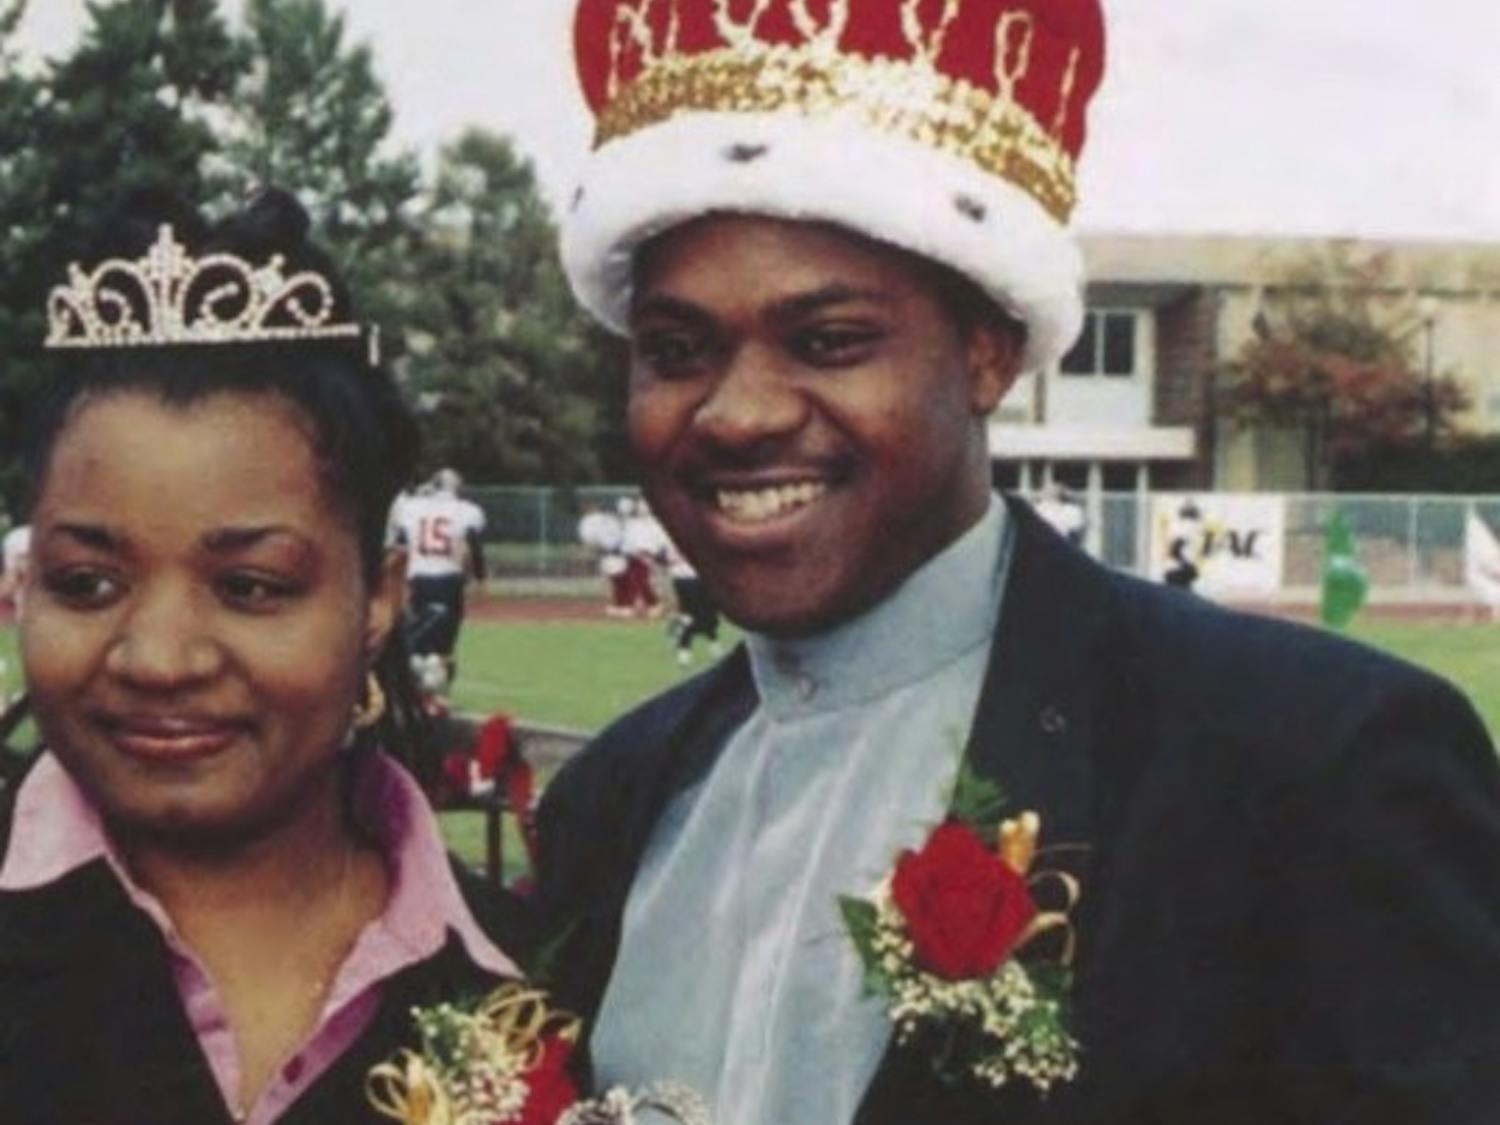 Antionette Greene and Jason Jenkins, pictured here during Homecoming 2002